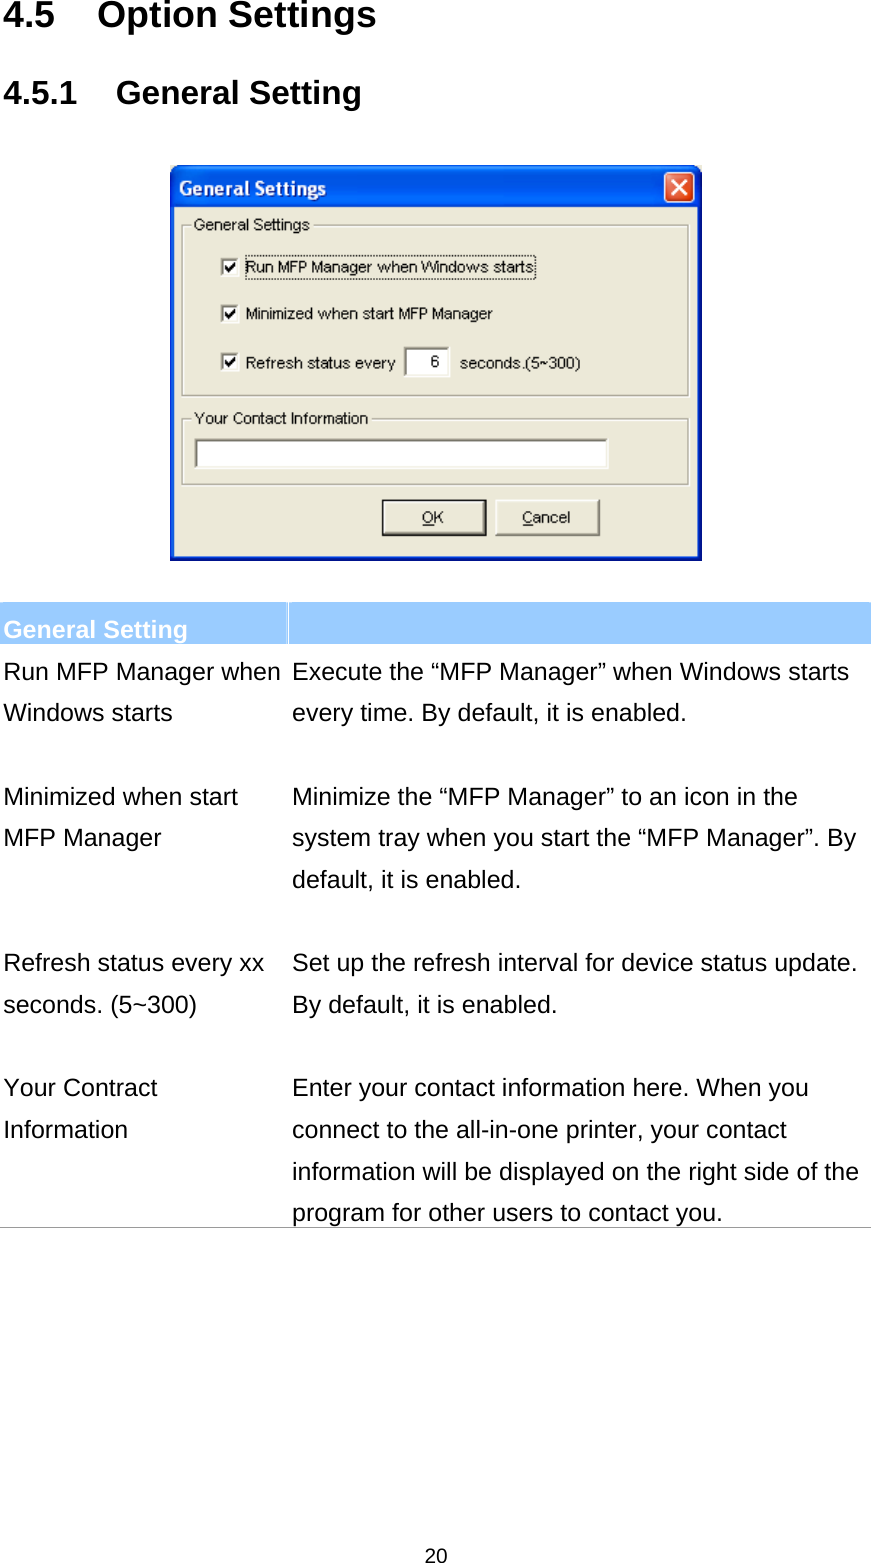 20 4.5 Option Settings 4.5.1 General Setting    General Setting   Run MFP Manager when Windows starts Execute the “MFP Manager” when Windows starts every time. By default, it is enabled.   Minimized when start MFP Manager   Minimize the “MFP Manager” to an icon in the system tray when you start the “MFP Manager”. By default, it is enabled.   Refresh status every xx seconds. (5~300) Set up the refresh interval for device status update. By default, it is enabled.   Your Contract Information Enter your contact information here. When you connect to the all-in-one printer, your contact information will be displayed on the right side of the program for other users to contact you.      